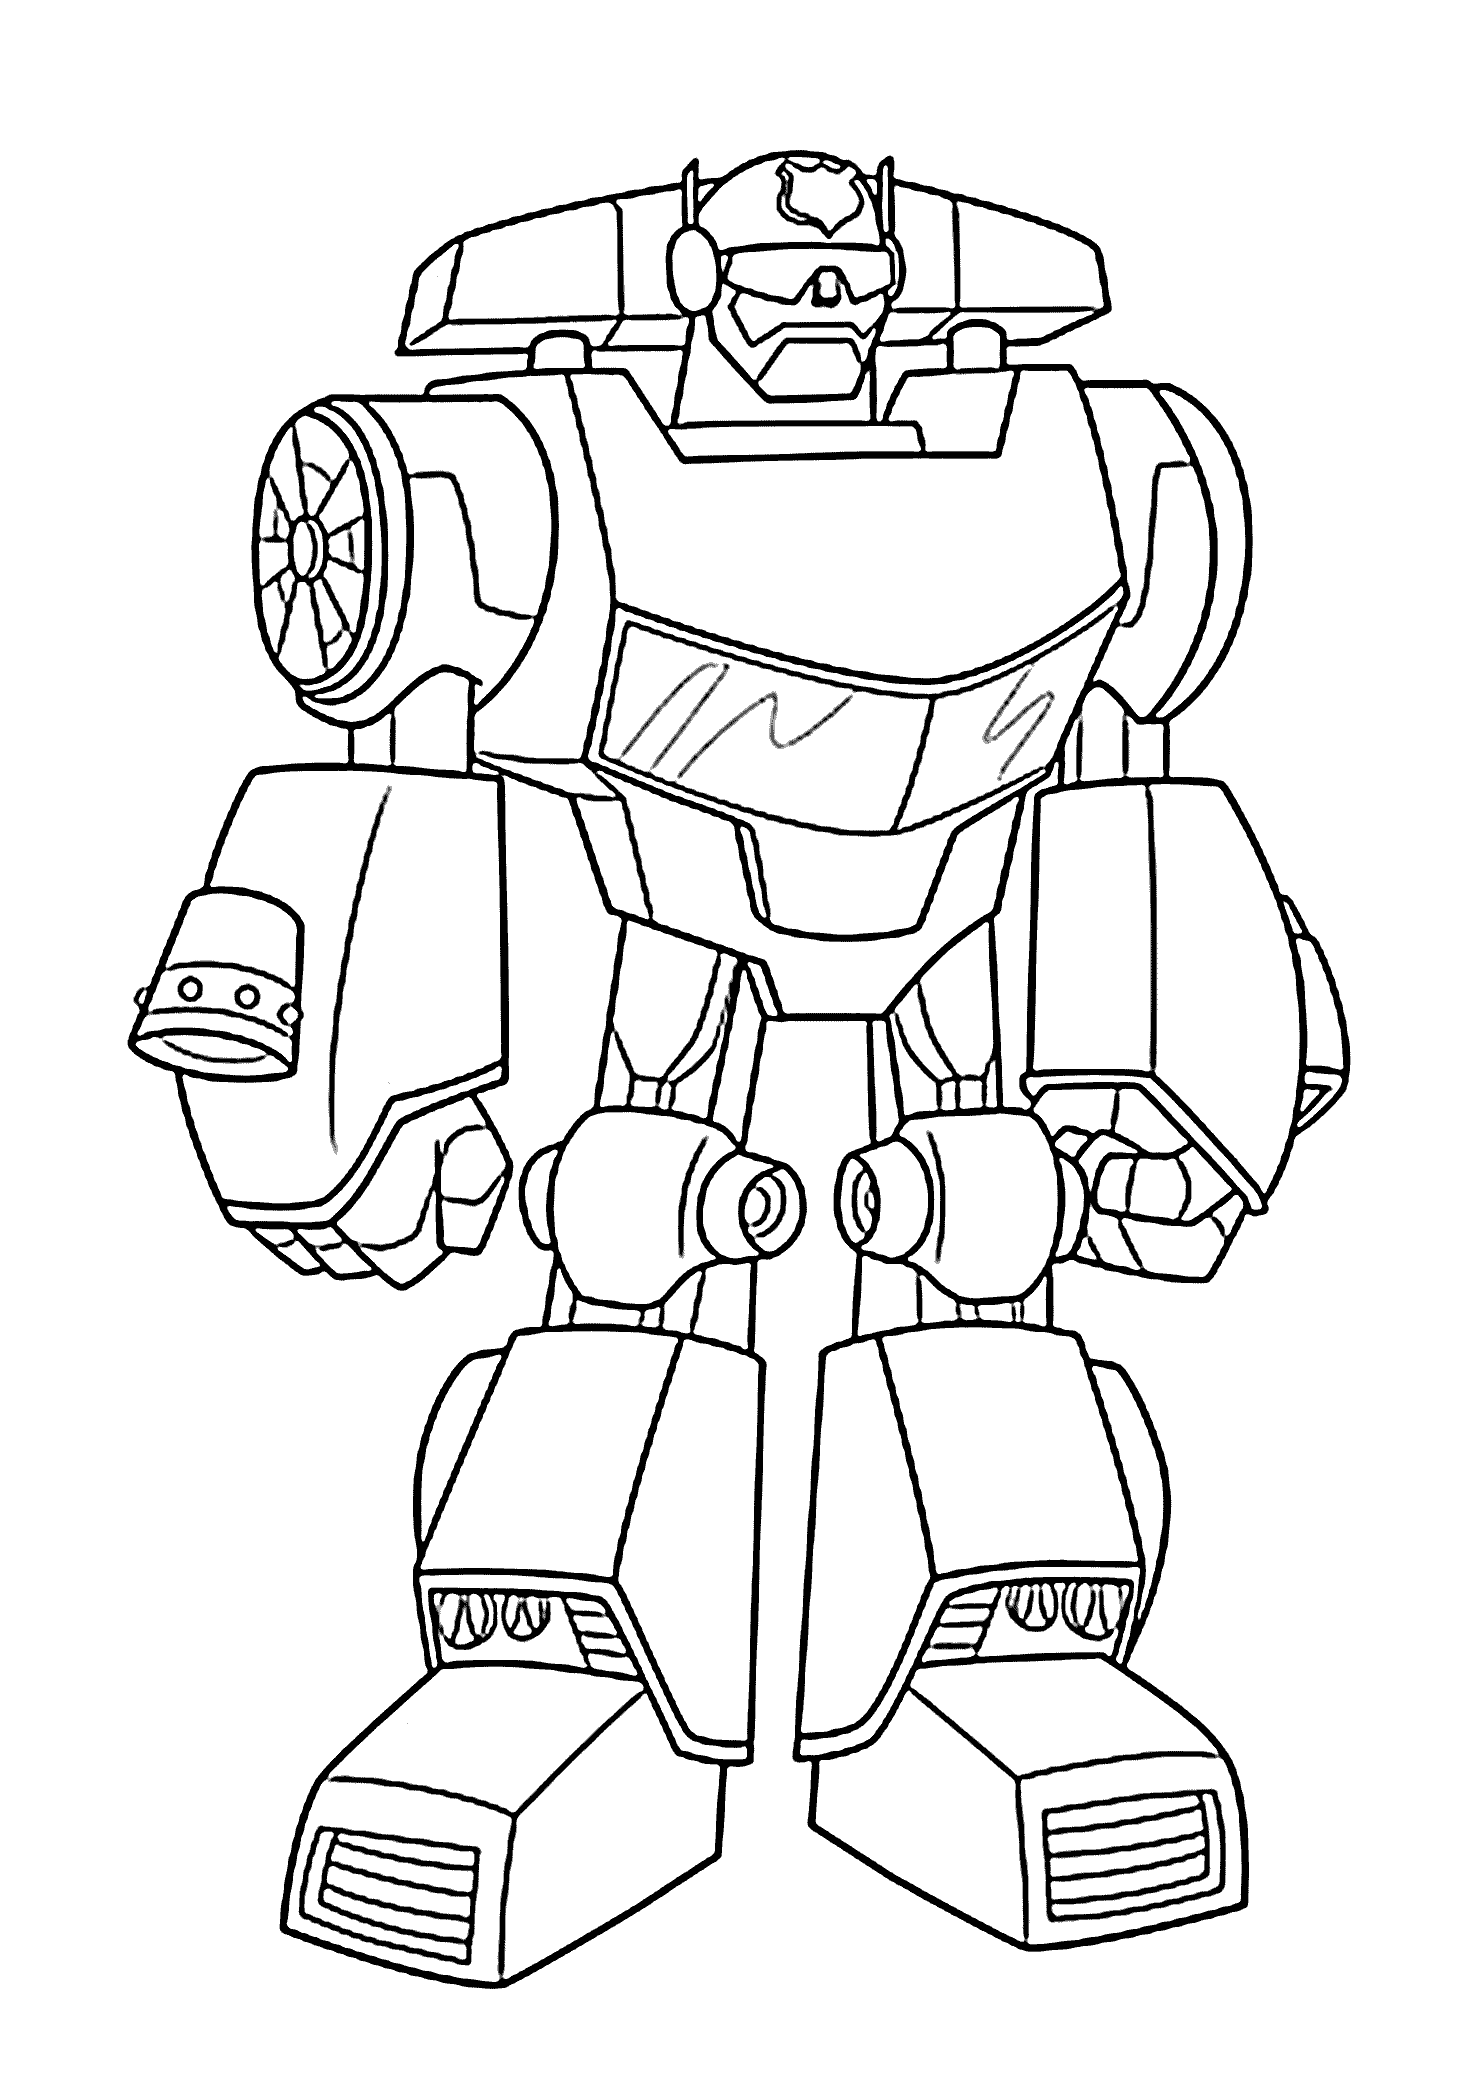 transformer coloring pages free transformers coloring pages print or download for free coloring transformer free pages 